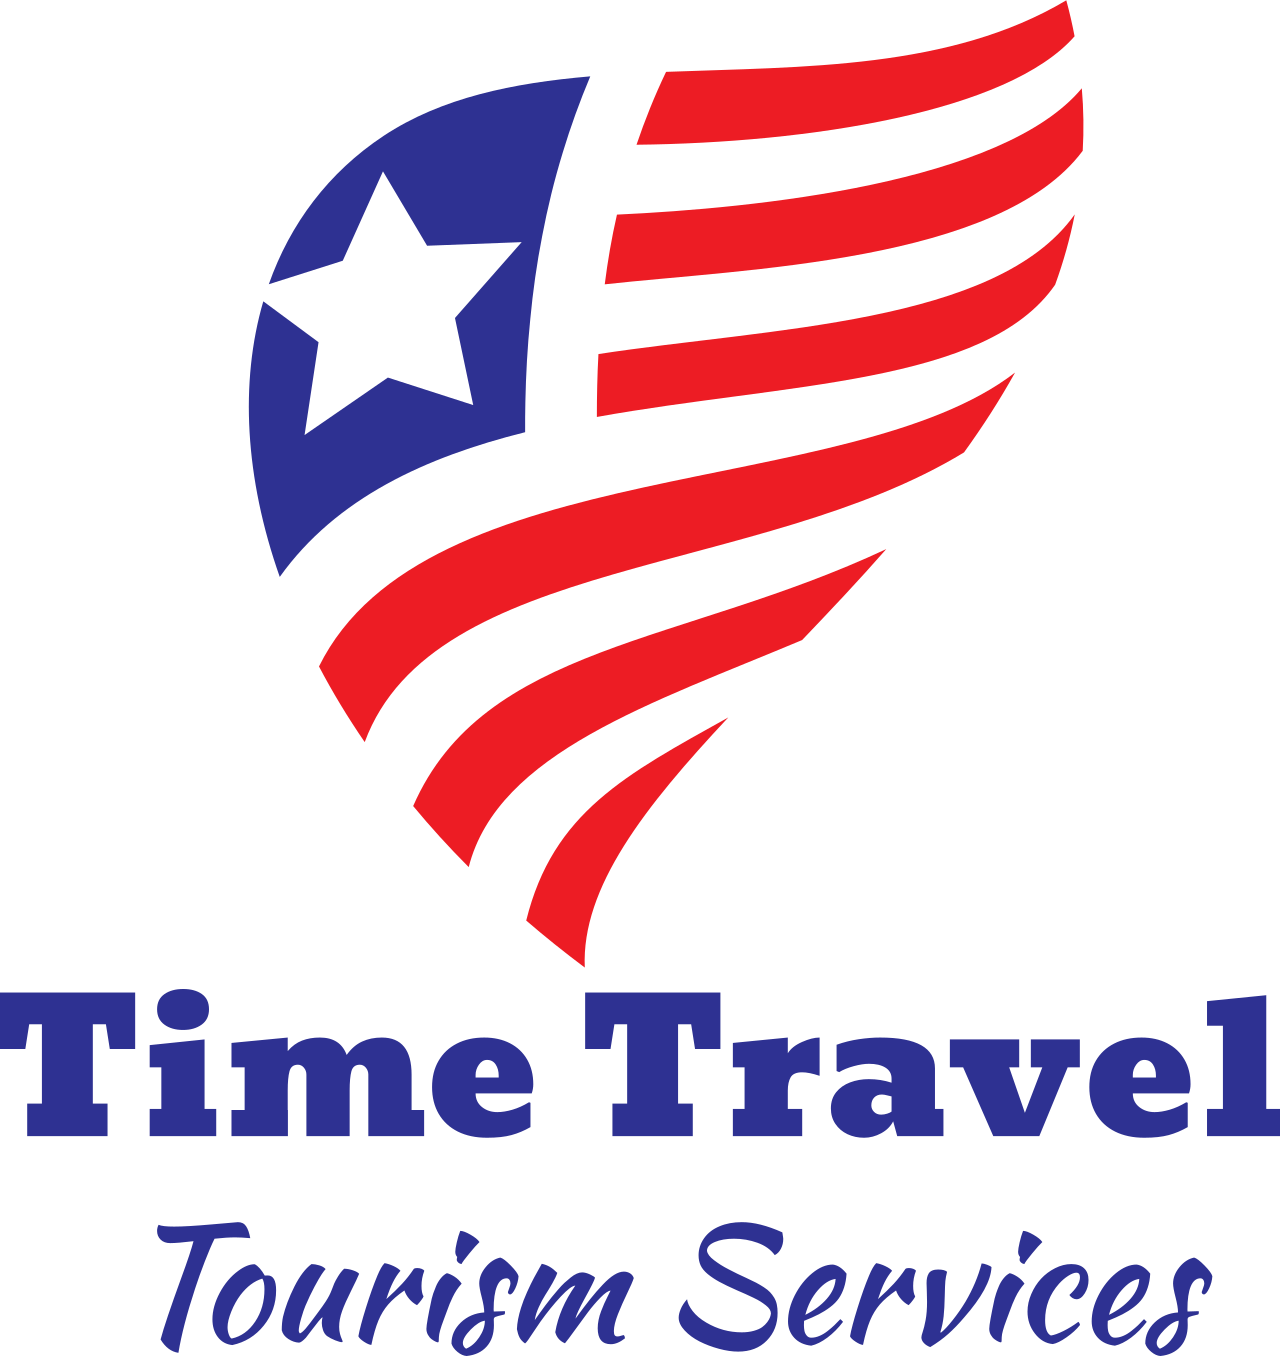 Time Travel 's web page